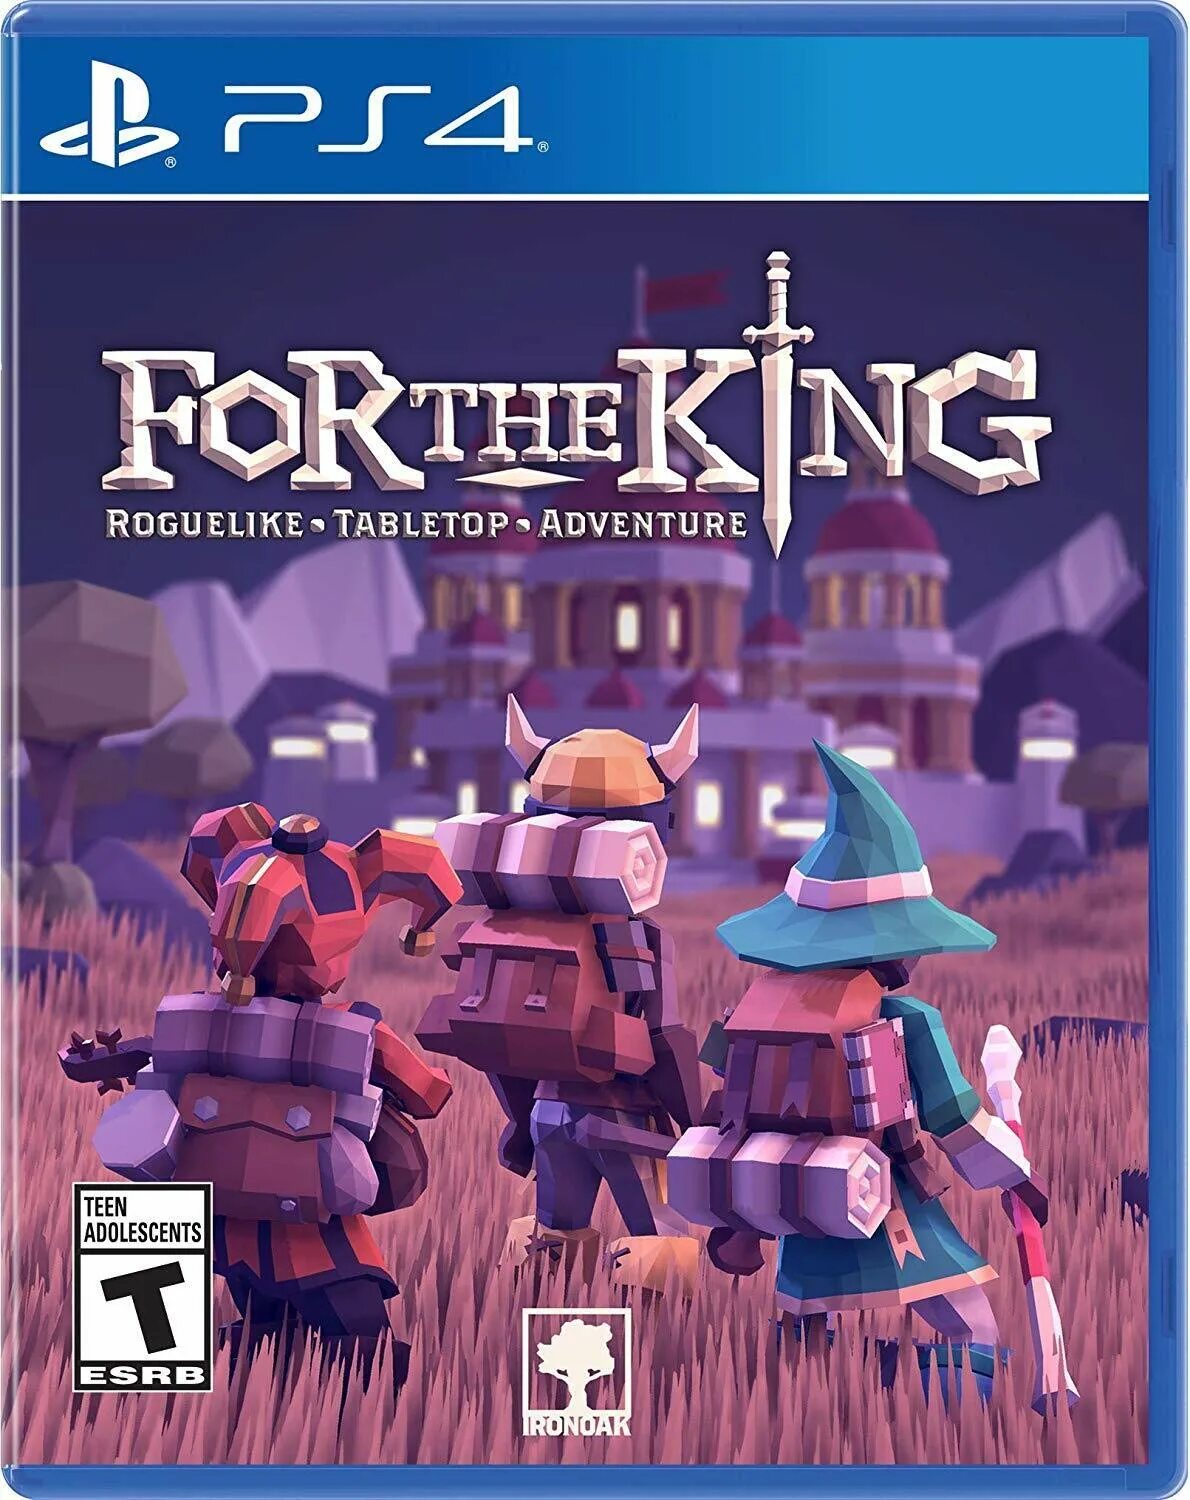 For the King ps4. Игры 12+. PS-4 for the King Roguelike Tabletop Adventure. МАНКЕЙ Кинг пс4.